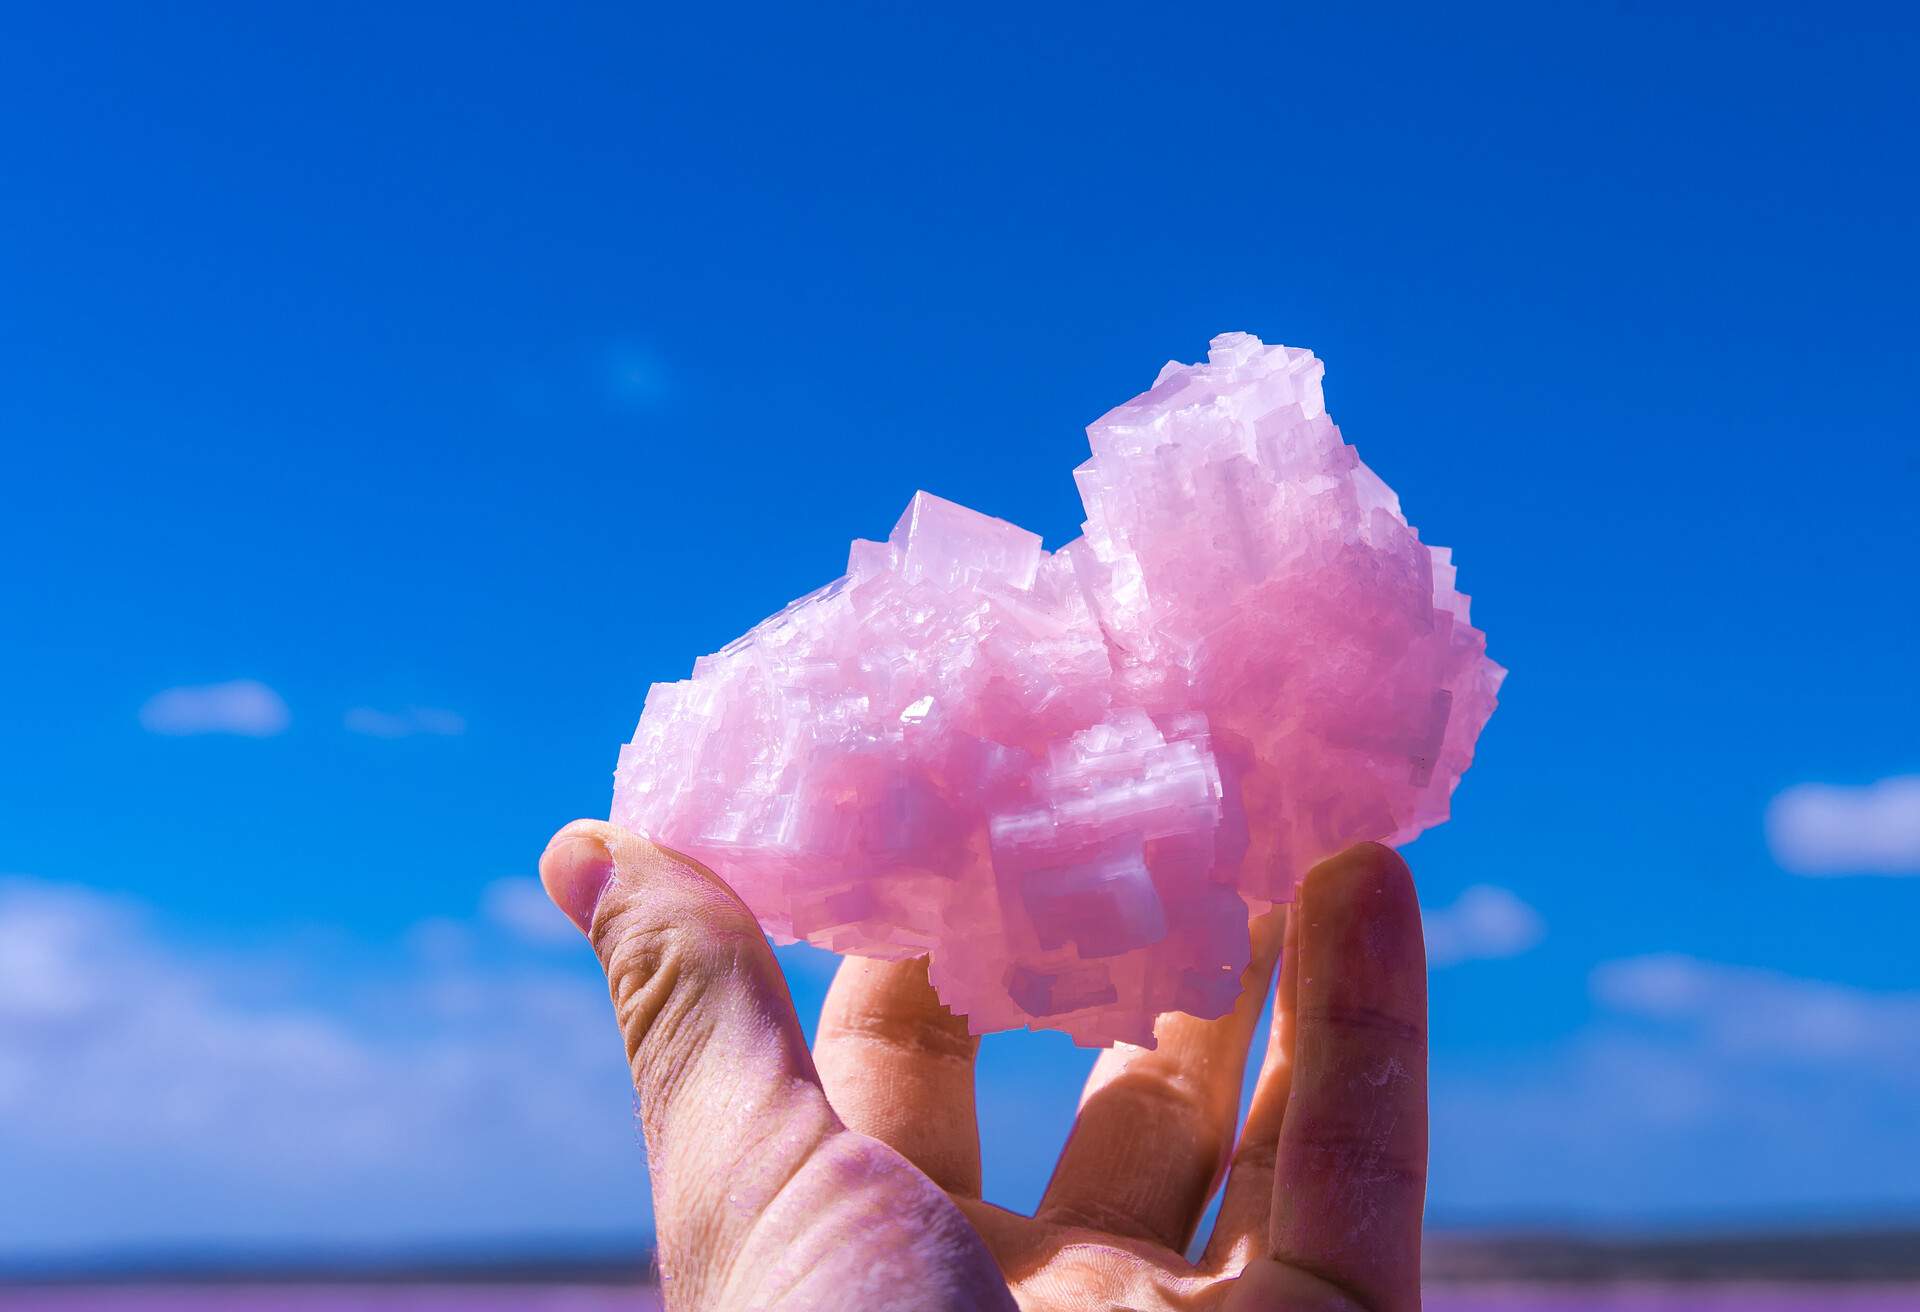 Close up of a hand holding pink natural salt crystals over blue sky. Tourist standing at the shore of scenic Pink Lake Hutt Lagoon at Port Gregory, Western Australia, WA